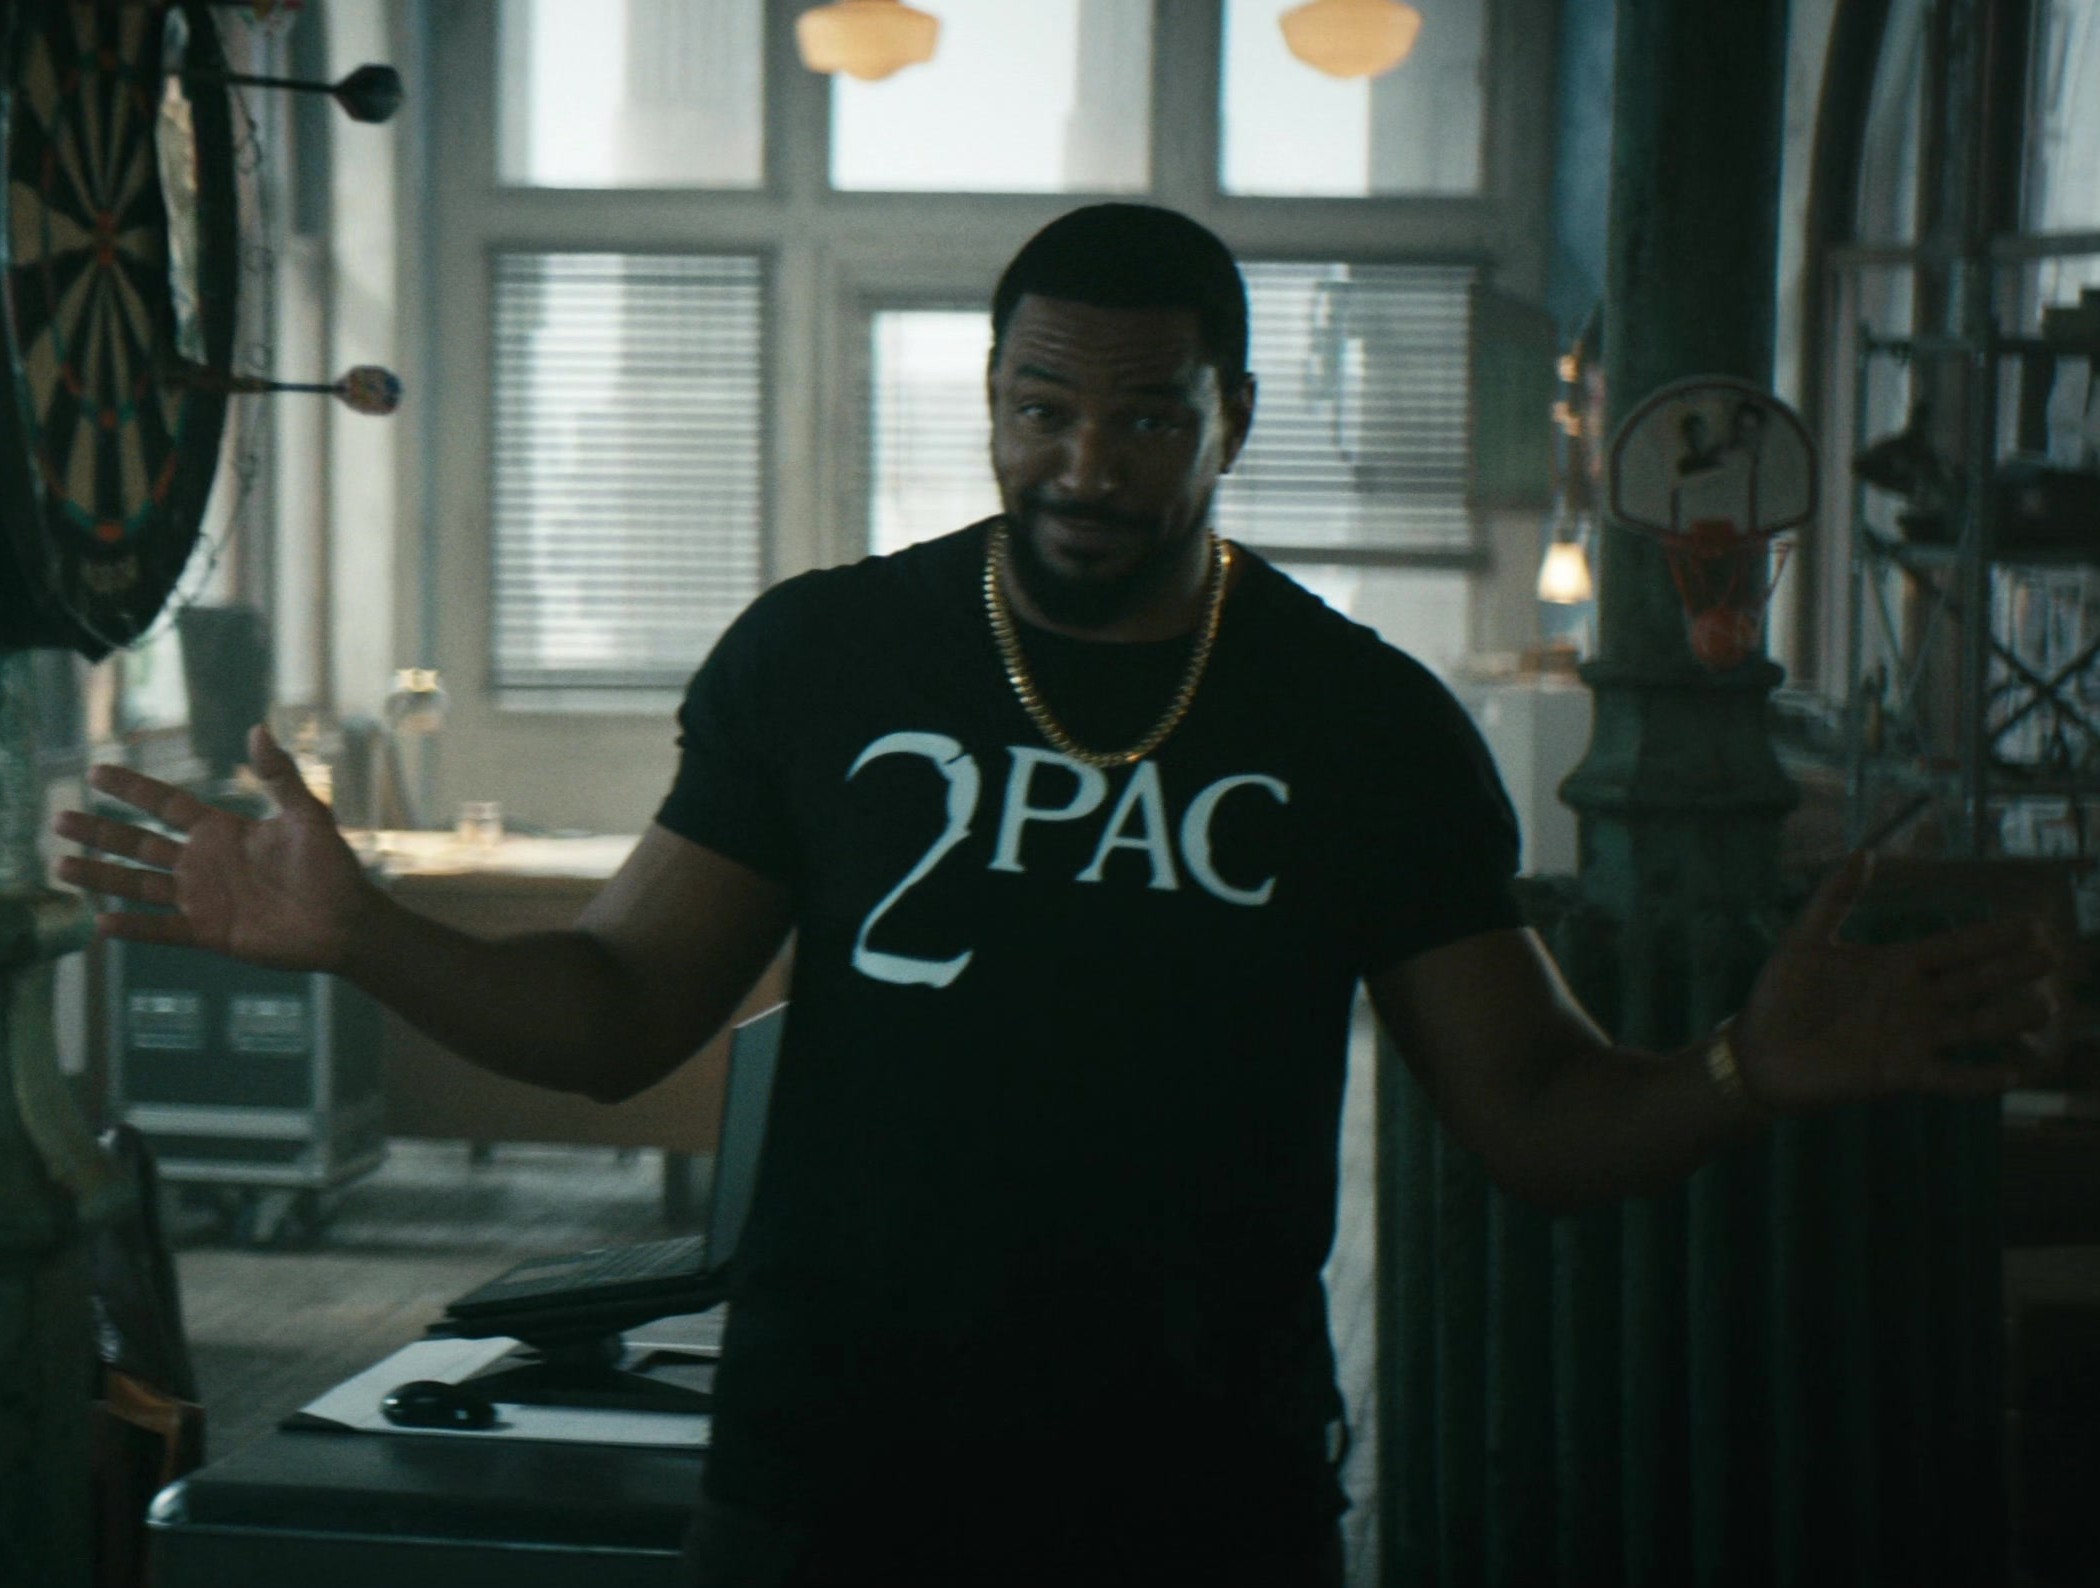 Worn on The Boys TV Show - Tupac Shakur Logo Black T-Shirt Worn by Laz Alonso as Marvin T. "Mother's" Milk / M.M.